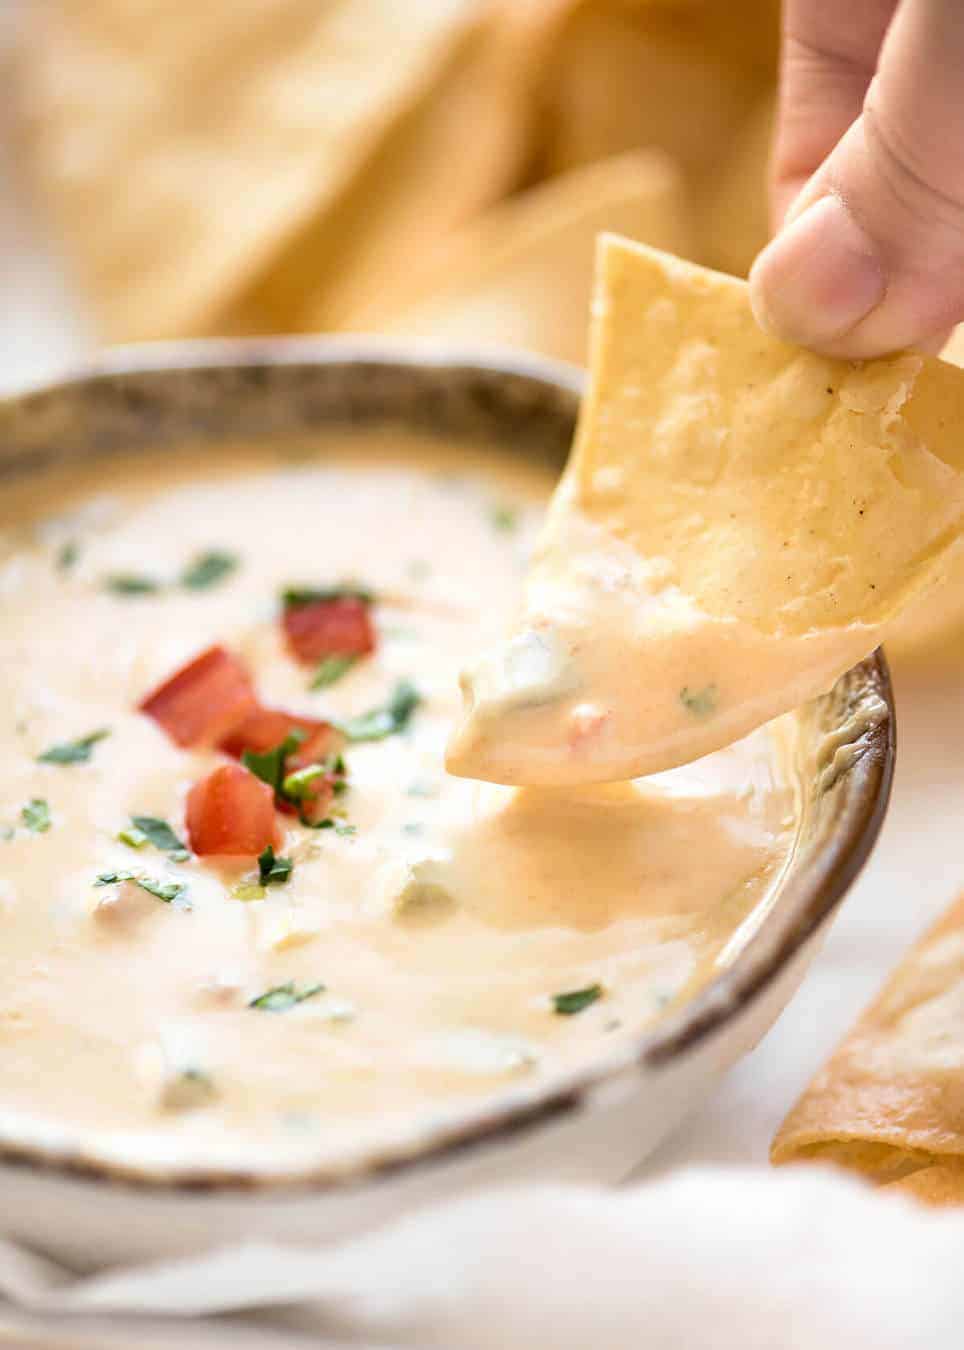 Code cracked: Queso Dip made with real cheese that's ultra silky even when it cools. www.recipetineats.com